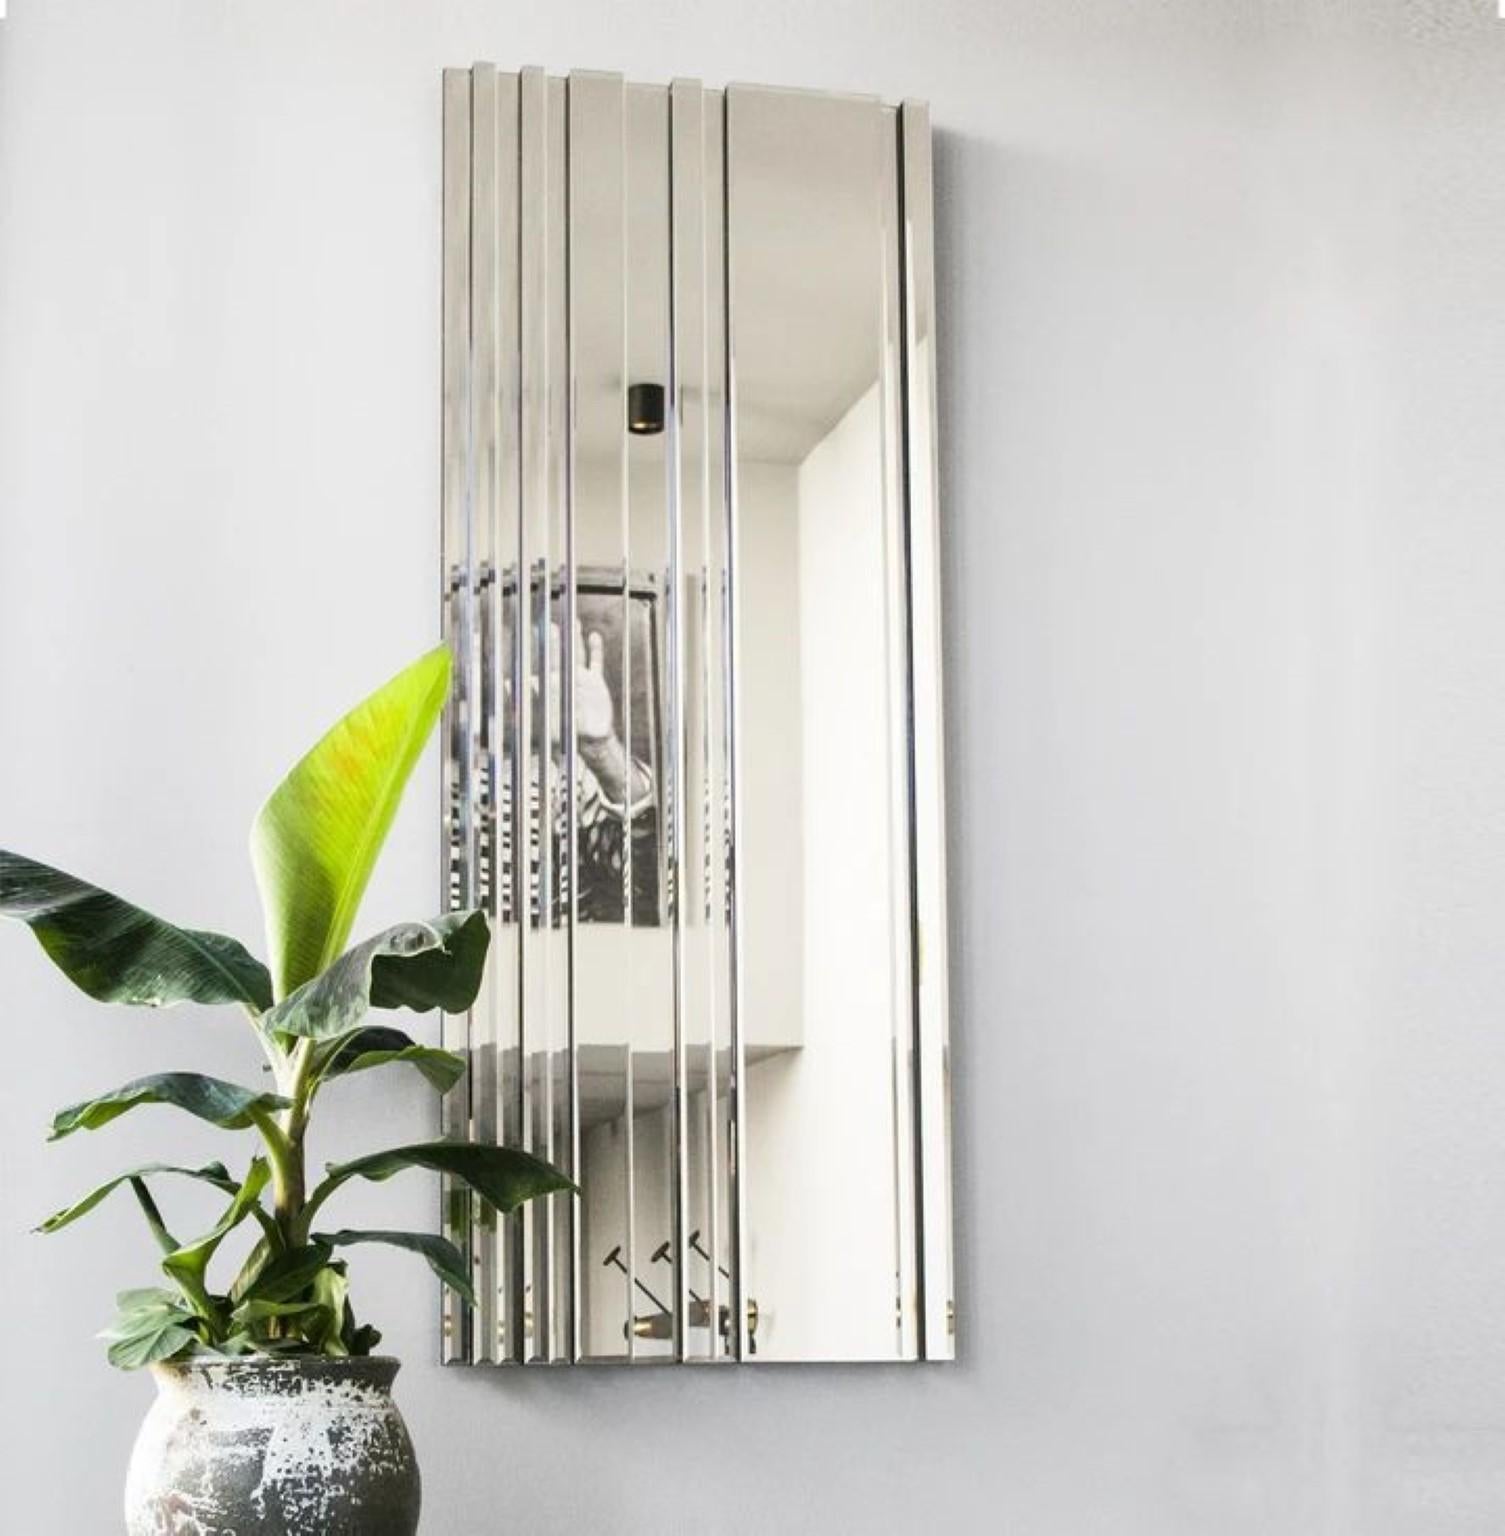 Rays of light mirror.
Dimensions: W 62 x D 4 x H 160 cm
Material: 6 mm faceted mirror on black painted MDF
Weight: 35 kg.

Accentuate your home decor with a Reflections Copenhagen Rays of Light full body mirror. By adding this mirror to your